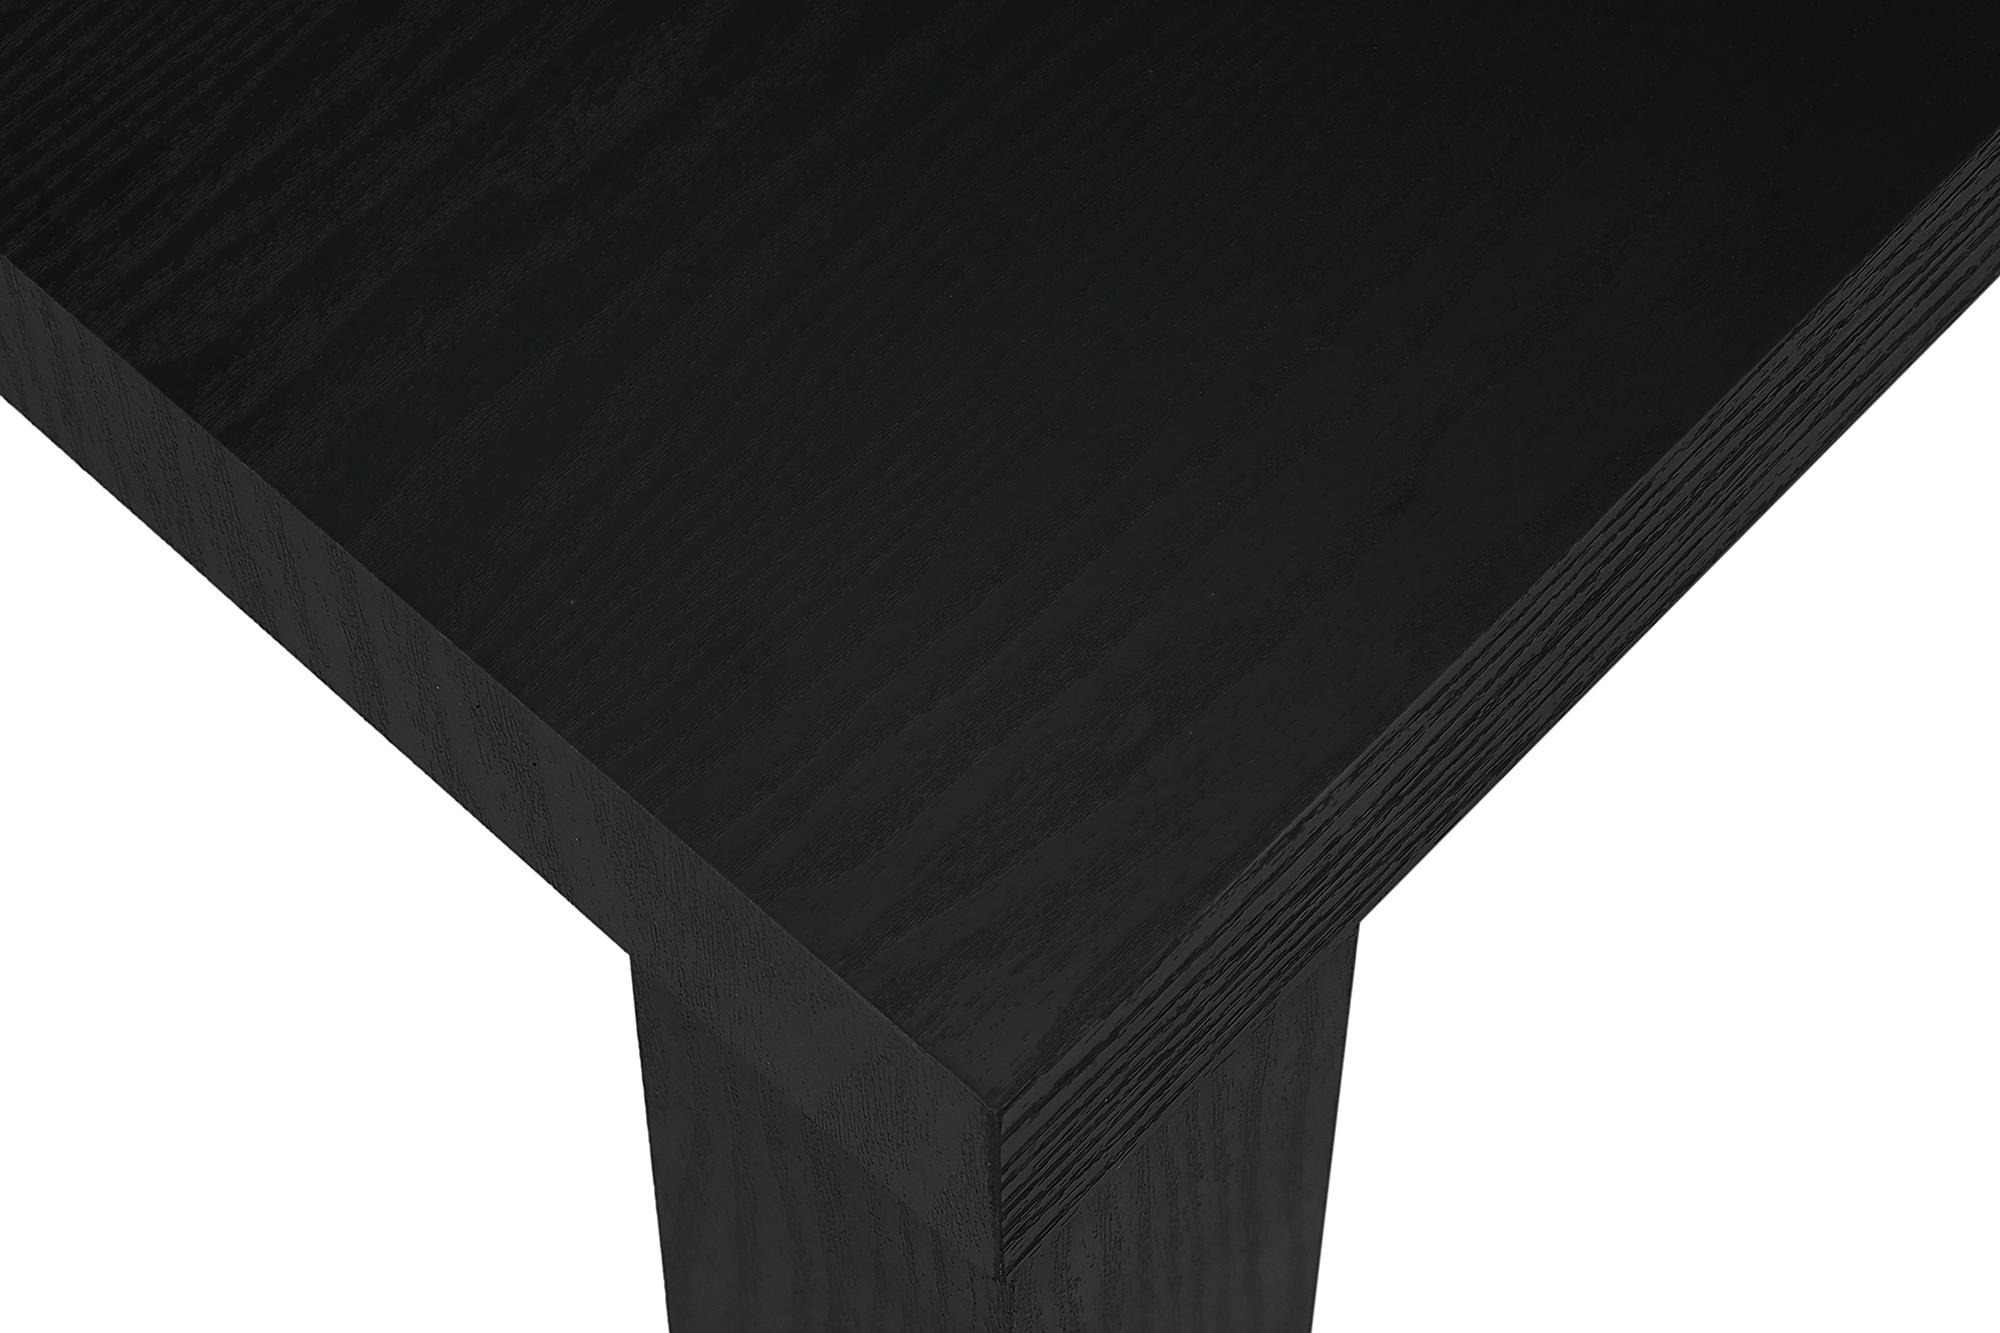 Mainstays Parsons Coffee Table, Black - image 3 of 6